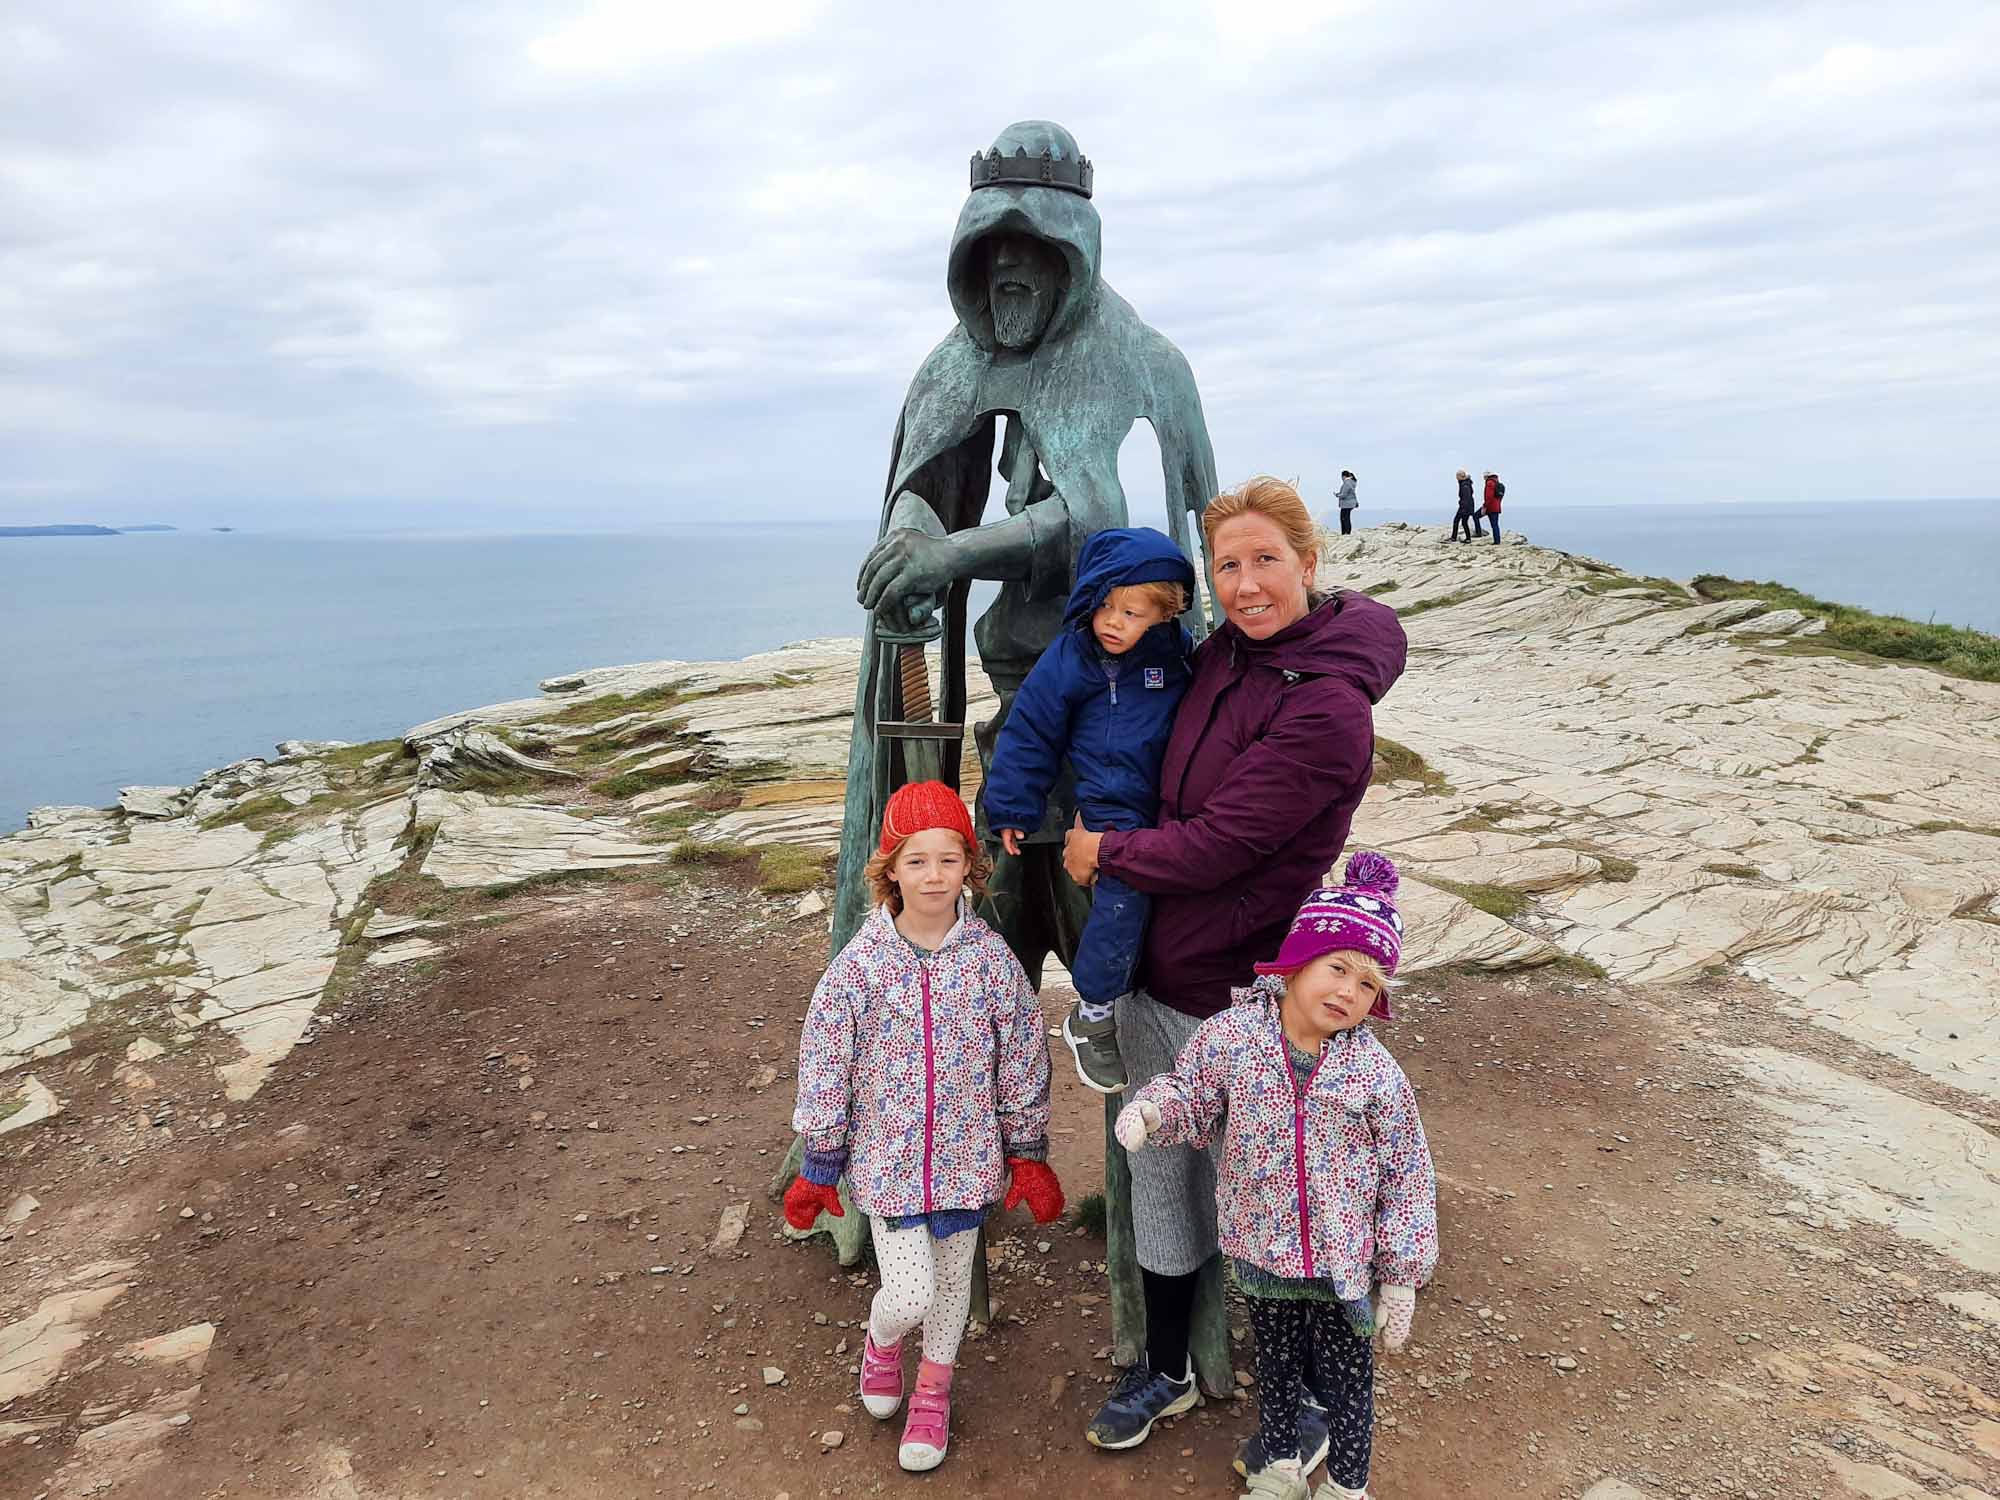 A family stood on a clifftop with a metal sculpture depicting King Arthur